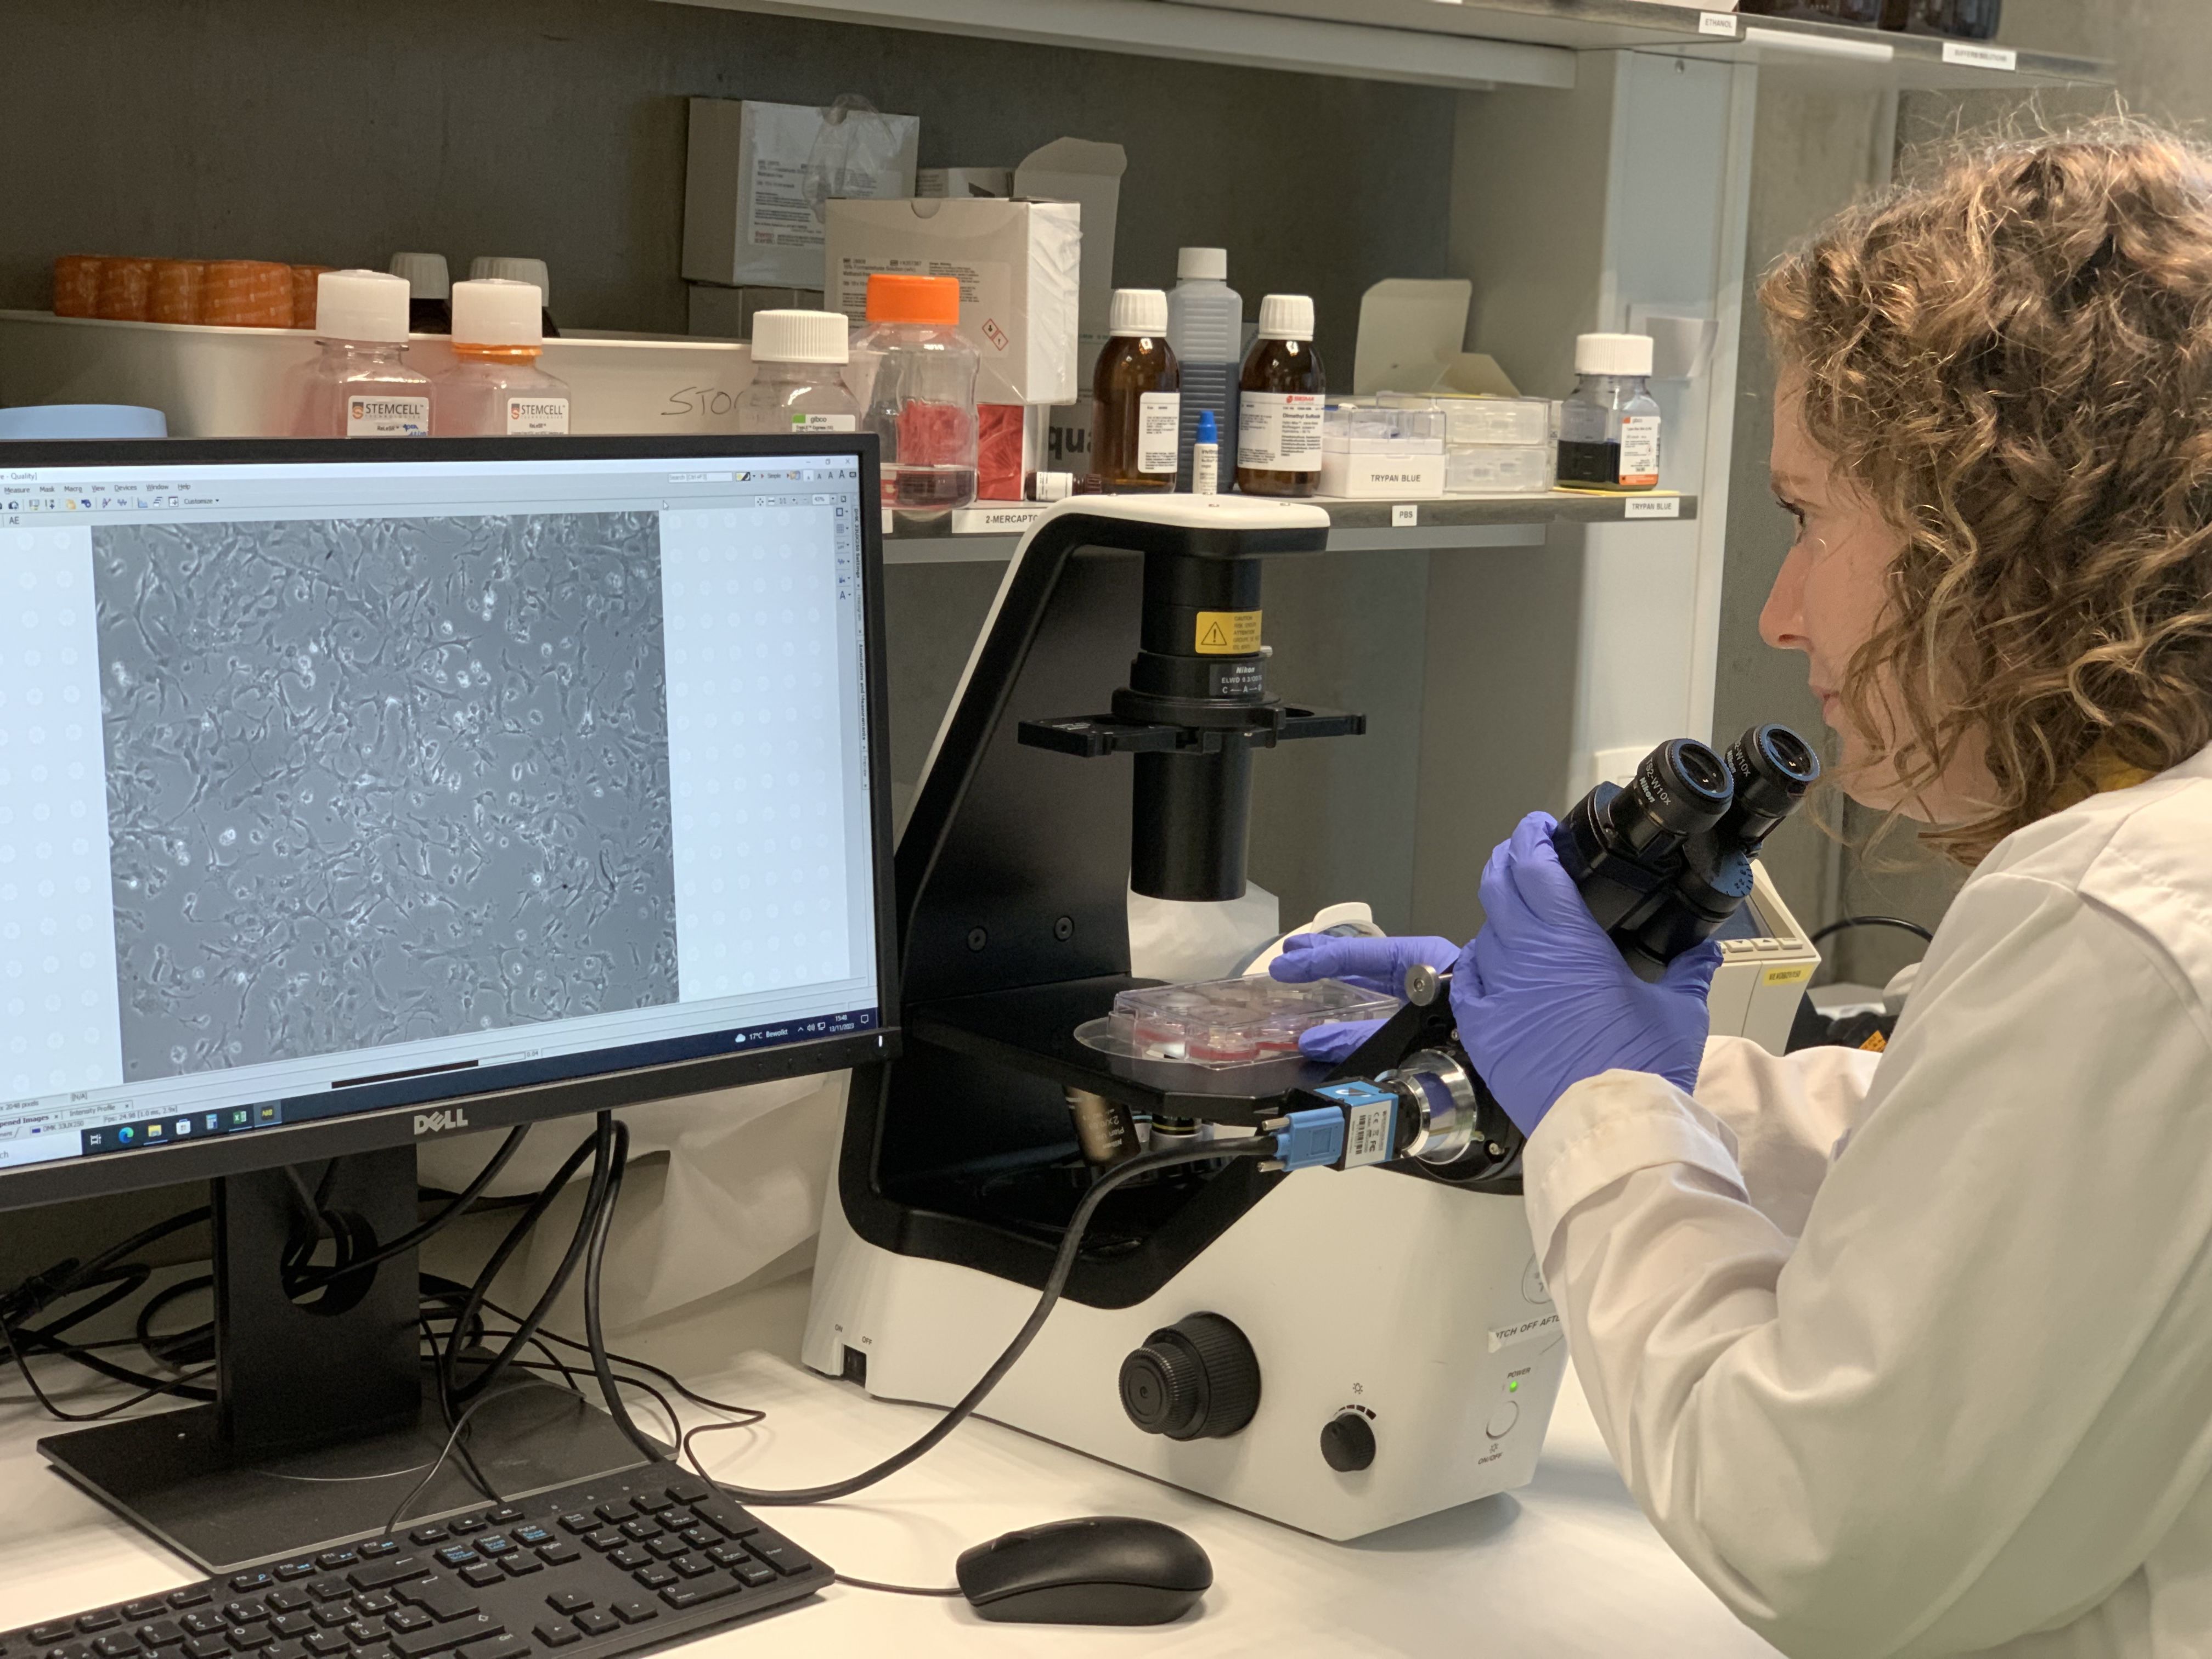 Christine Germeys is differentiating astrocytes derived from induced pluripotent stem cells (iPSCs) under the brightfield microscope in the Van Den Bosch lab.